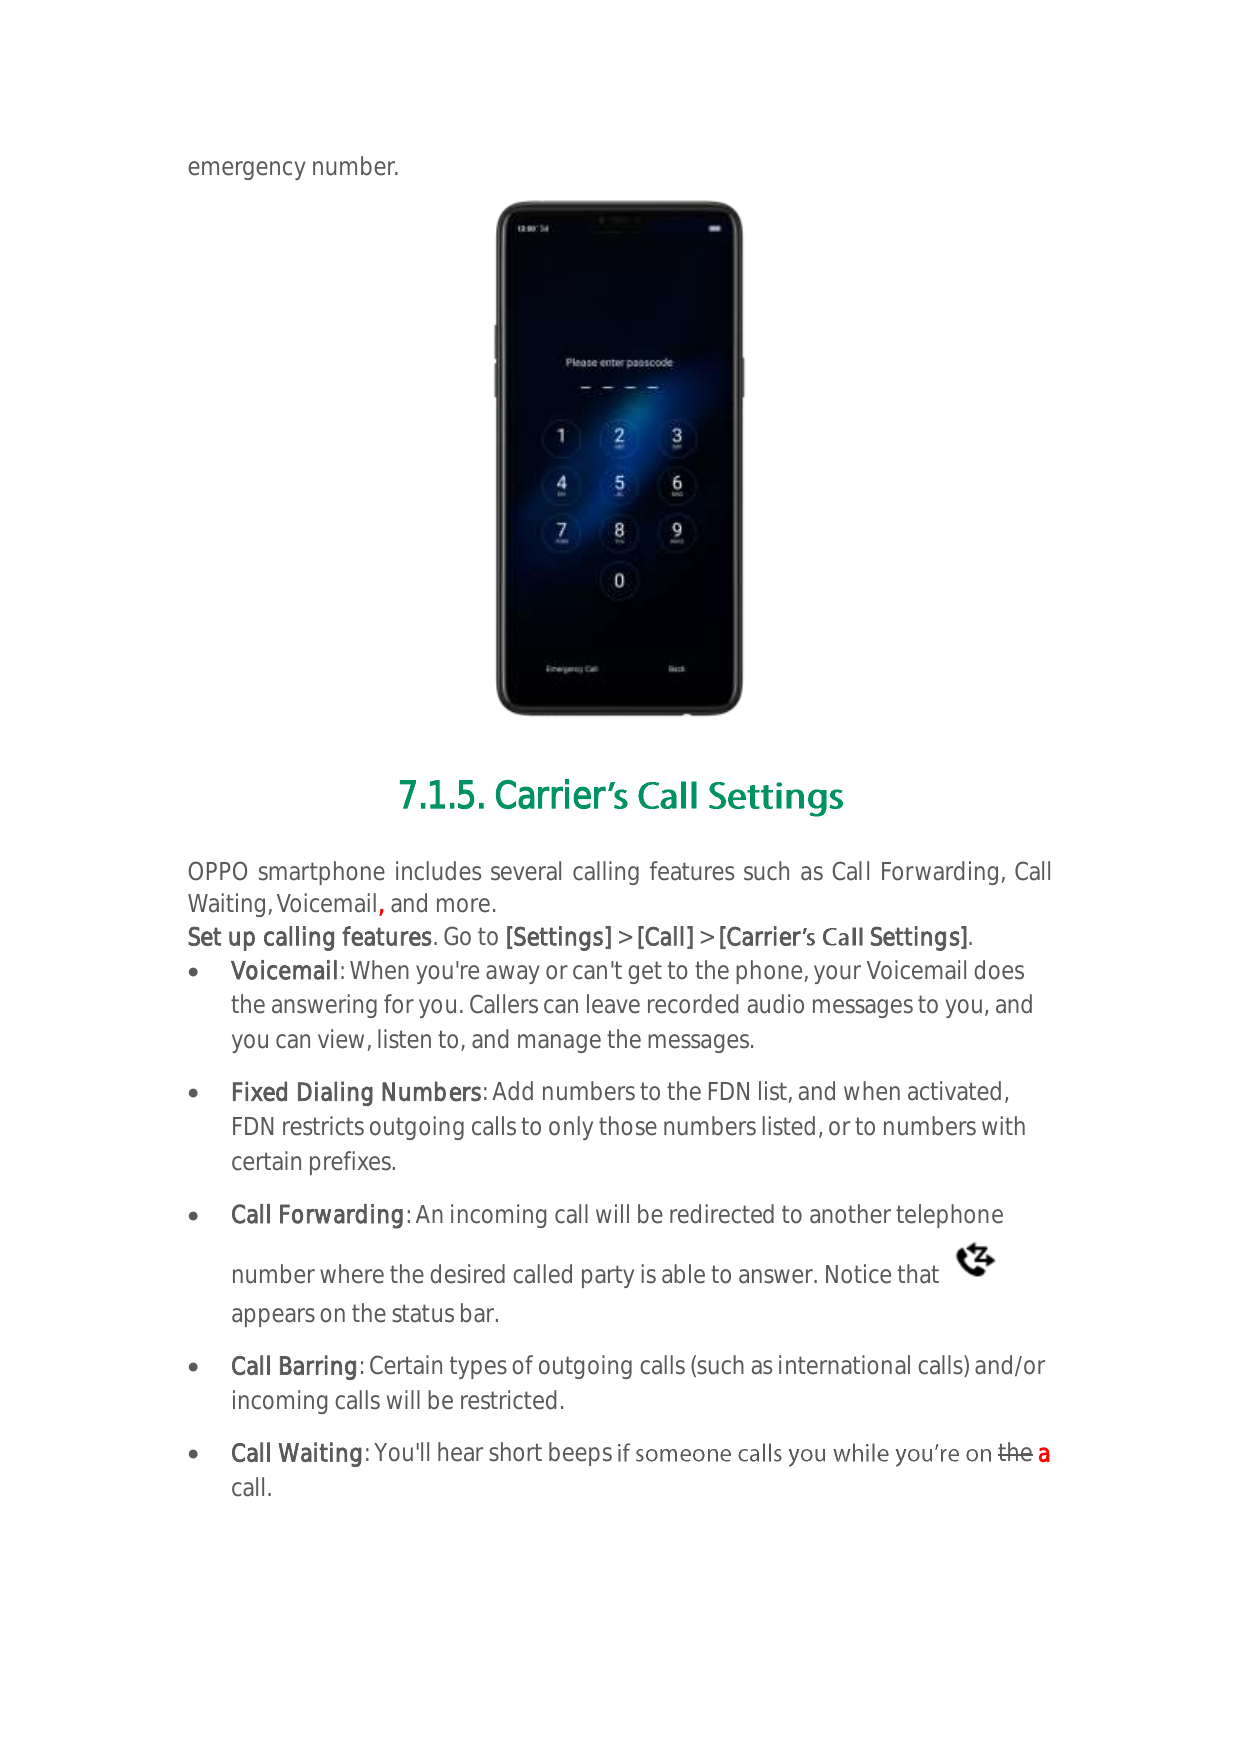 emergency number.7.1.5. CarrierOPPO smartphone includes several calling features such as Call Forwarding, CallWaiting, Voicemail